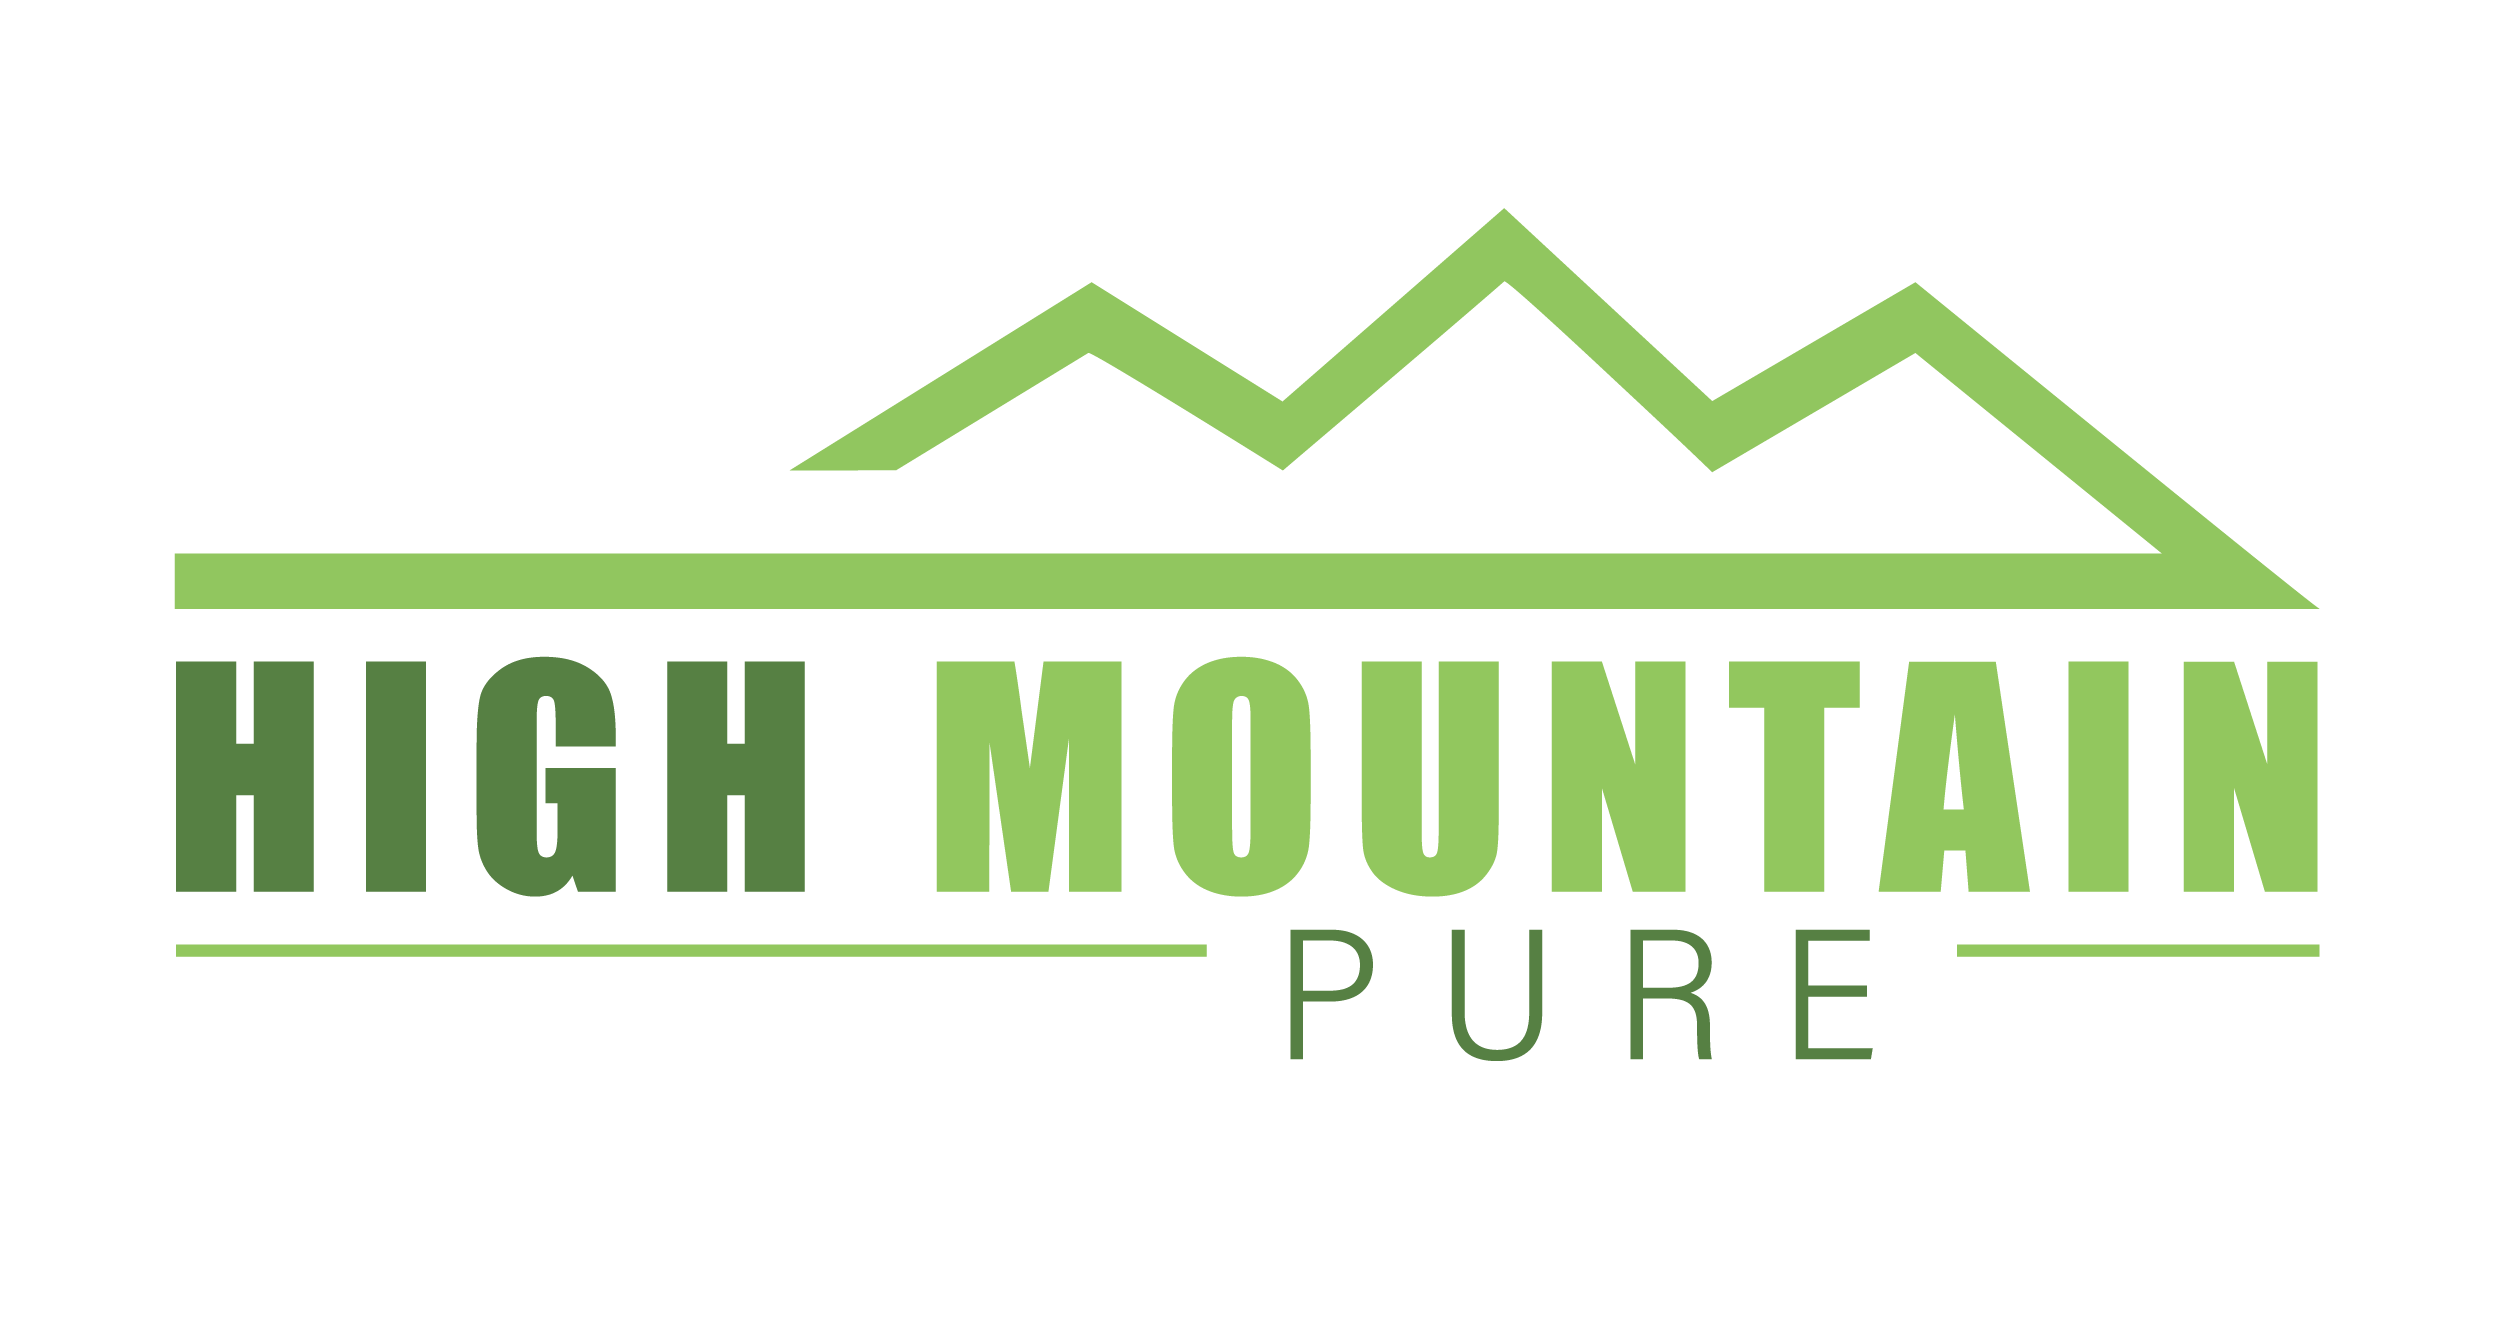 High Mountian Pure